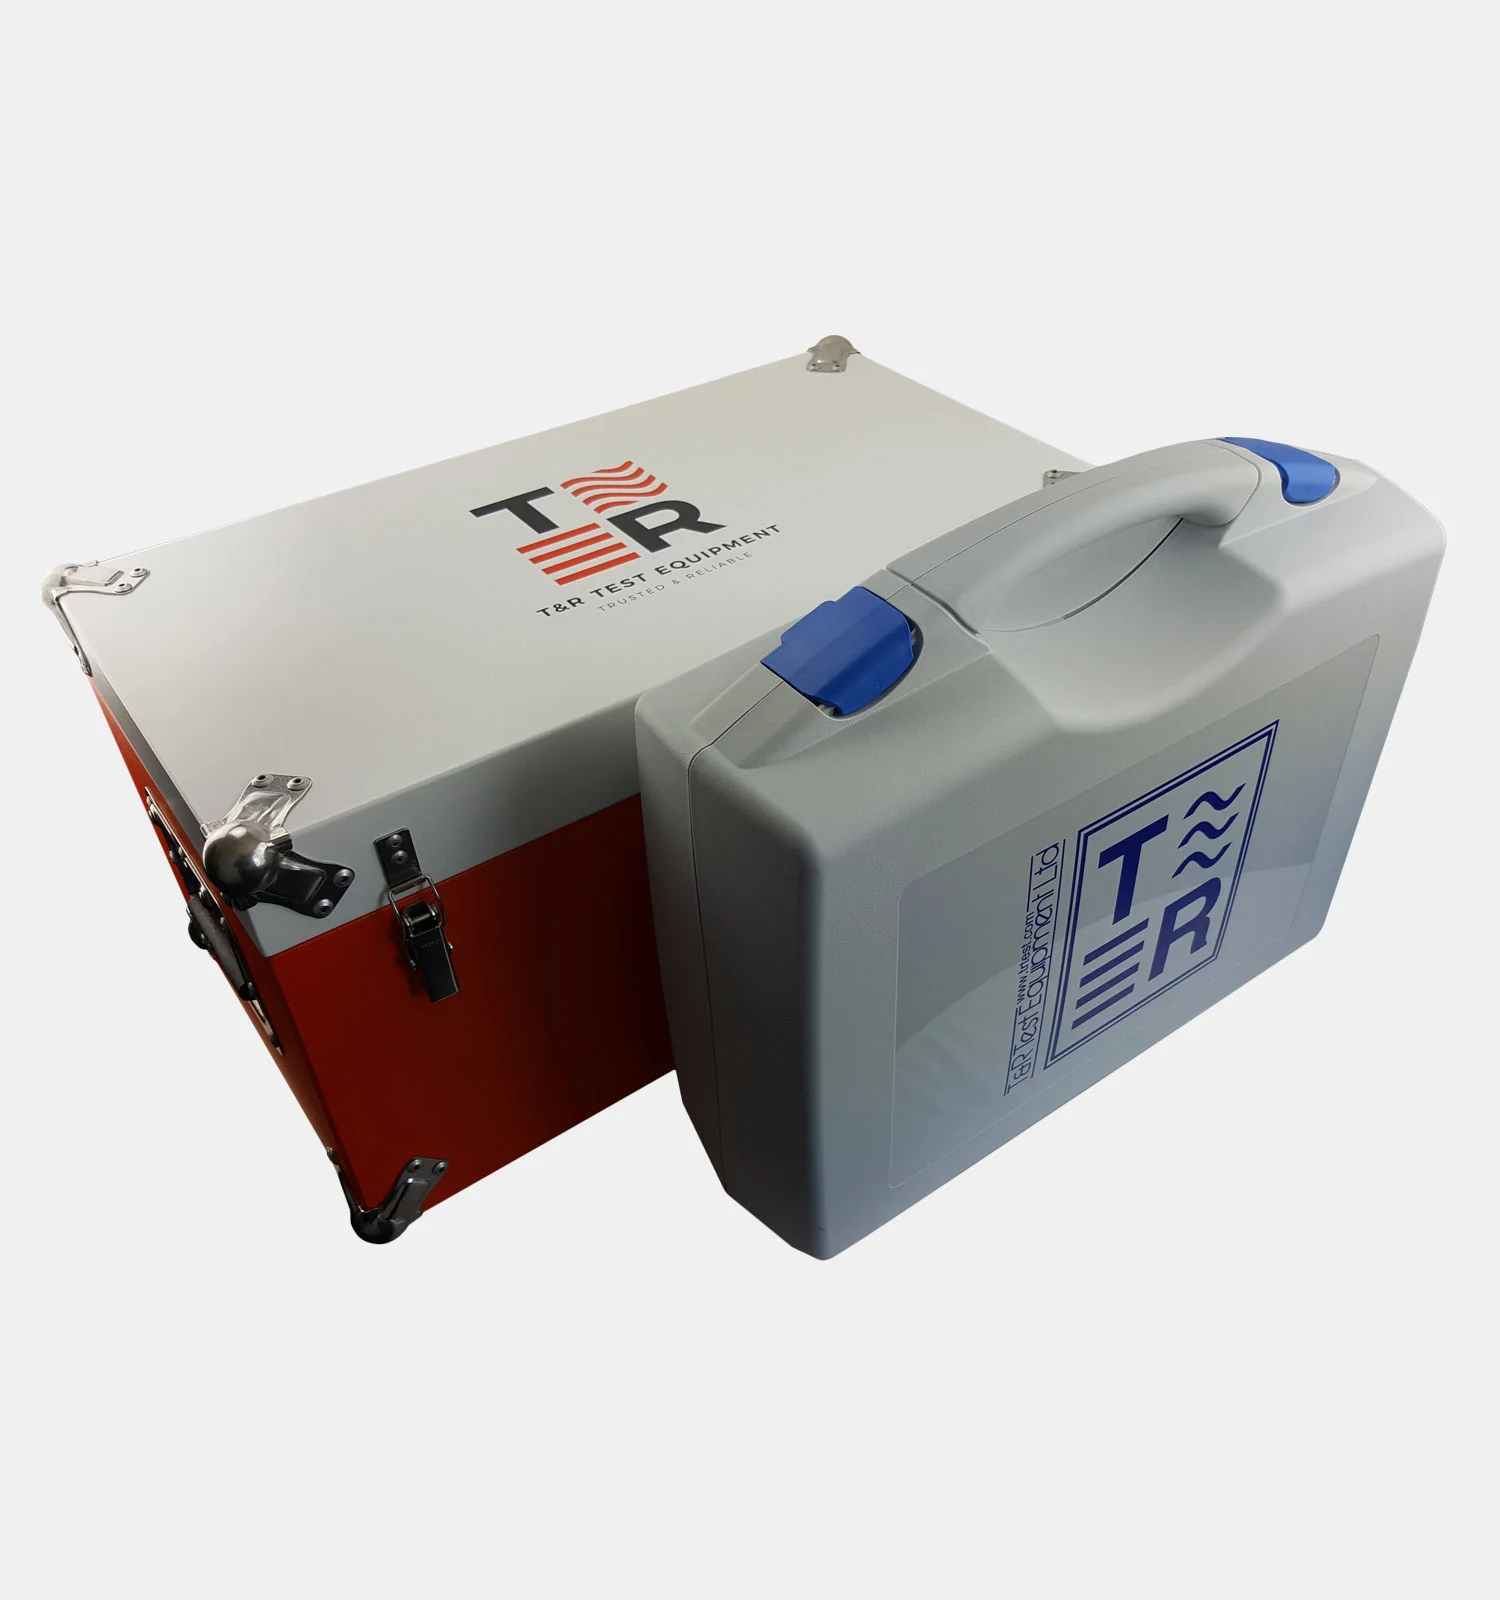 Suppliers of 200A-3PH MK3 Secondary Current Injection Test Set UK